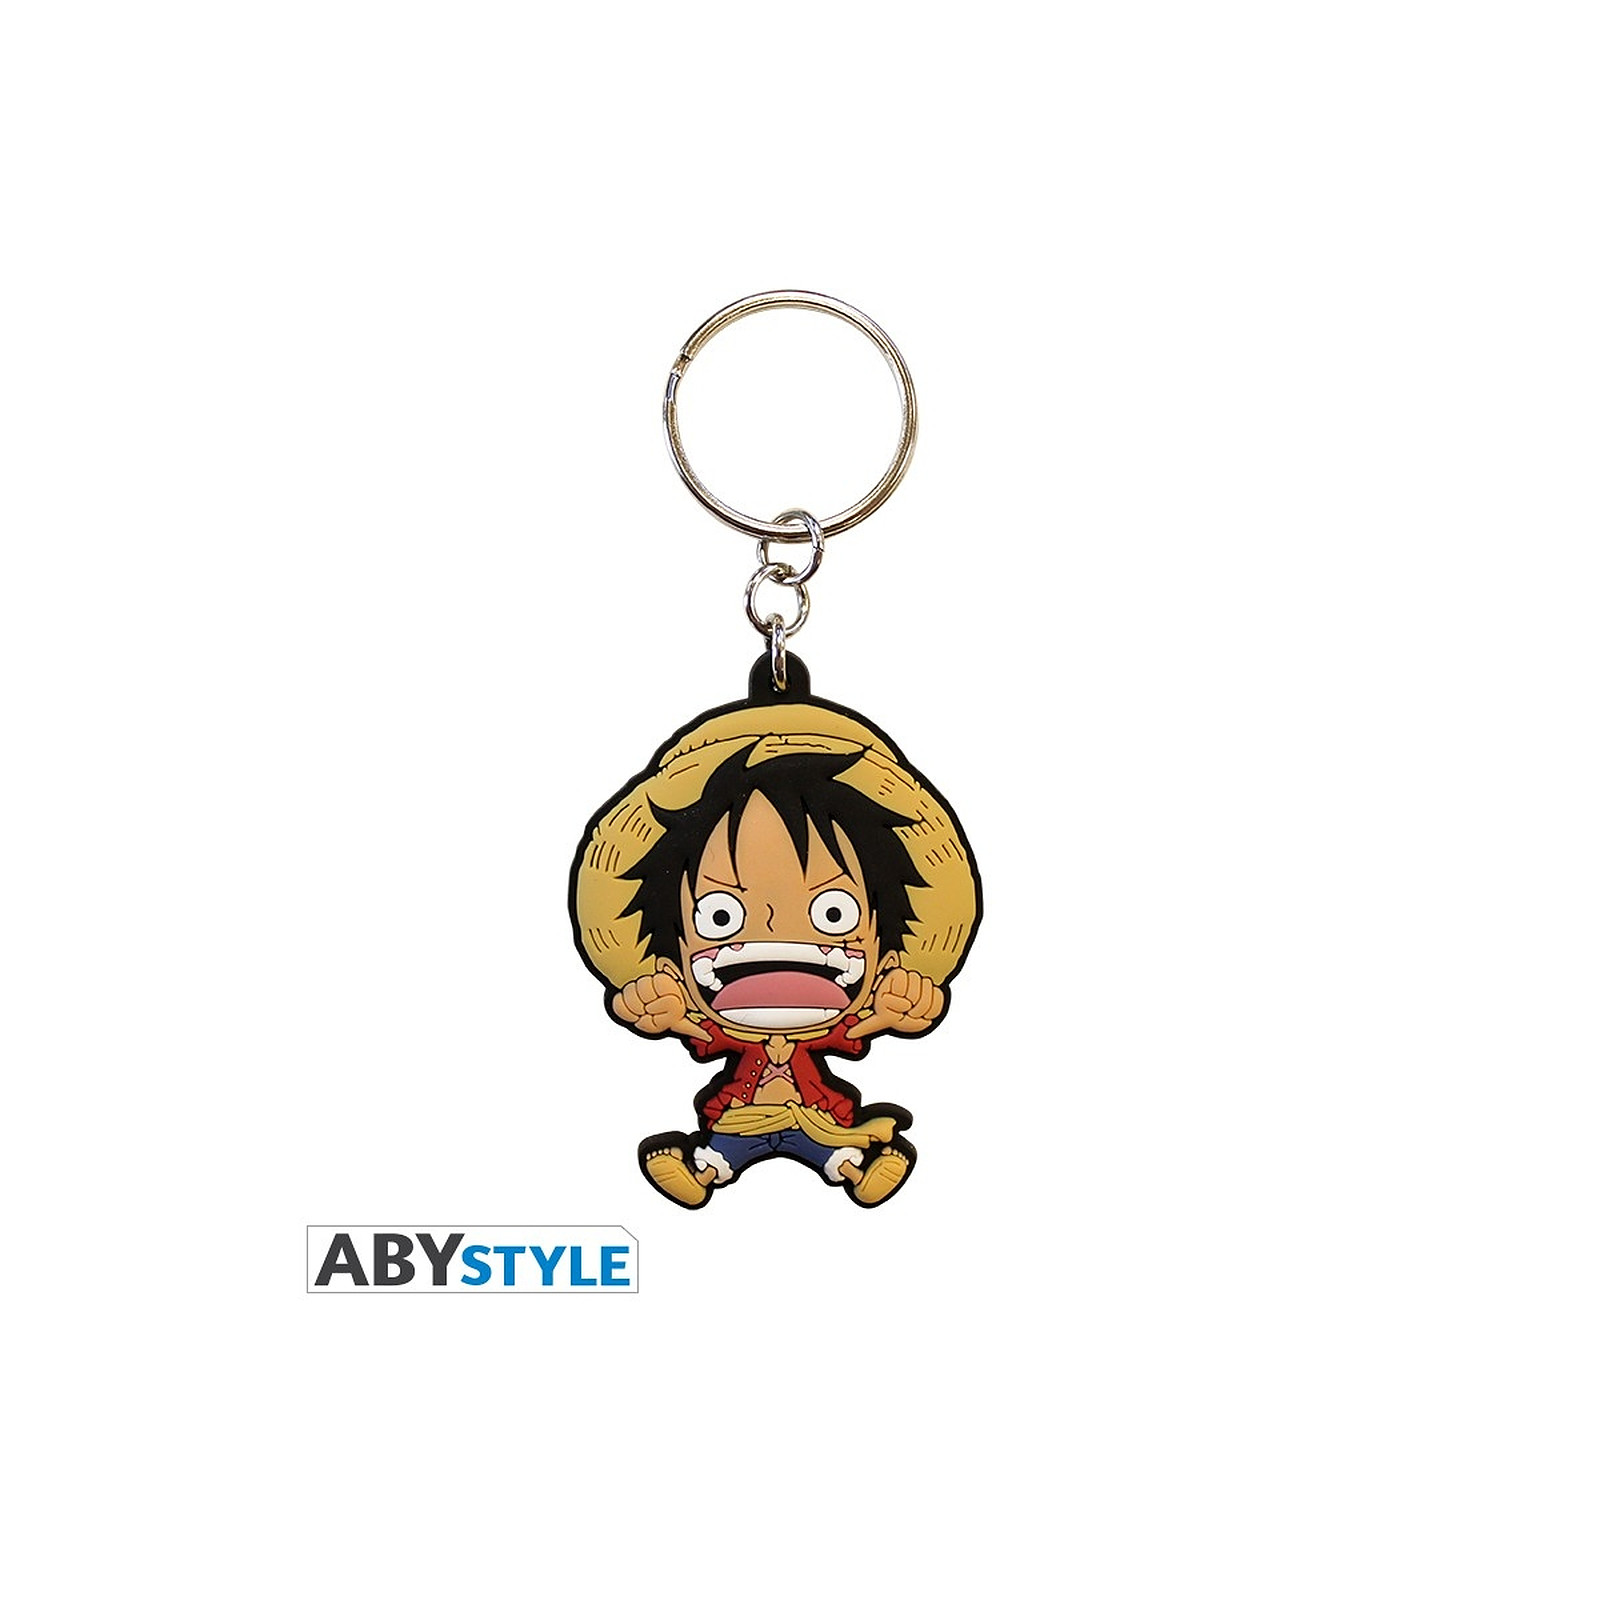 ONE PIECE - Porte-cles PVC Luffy SD - Porte-cles Abystyle